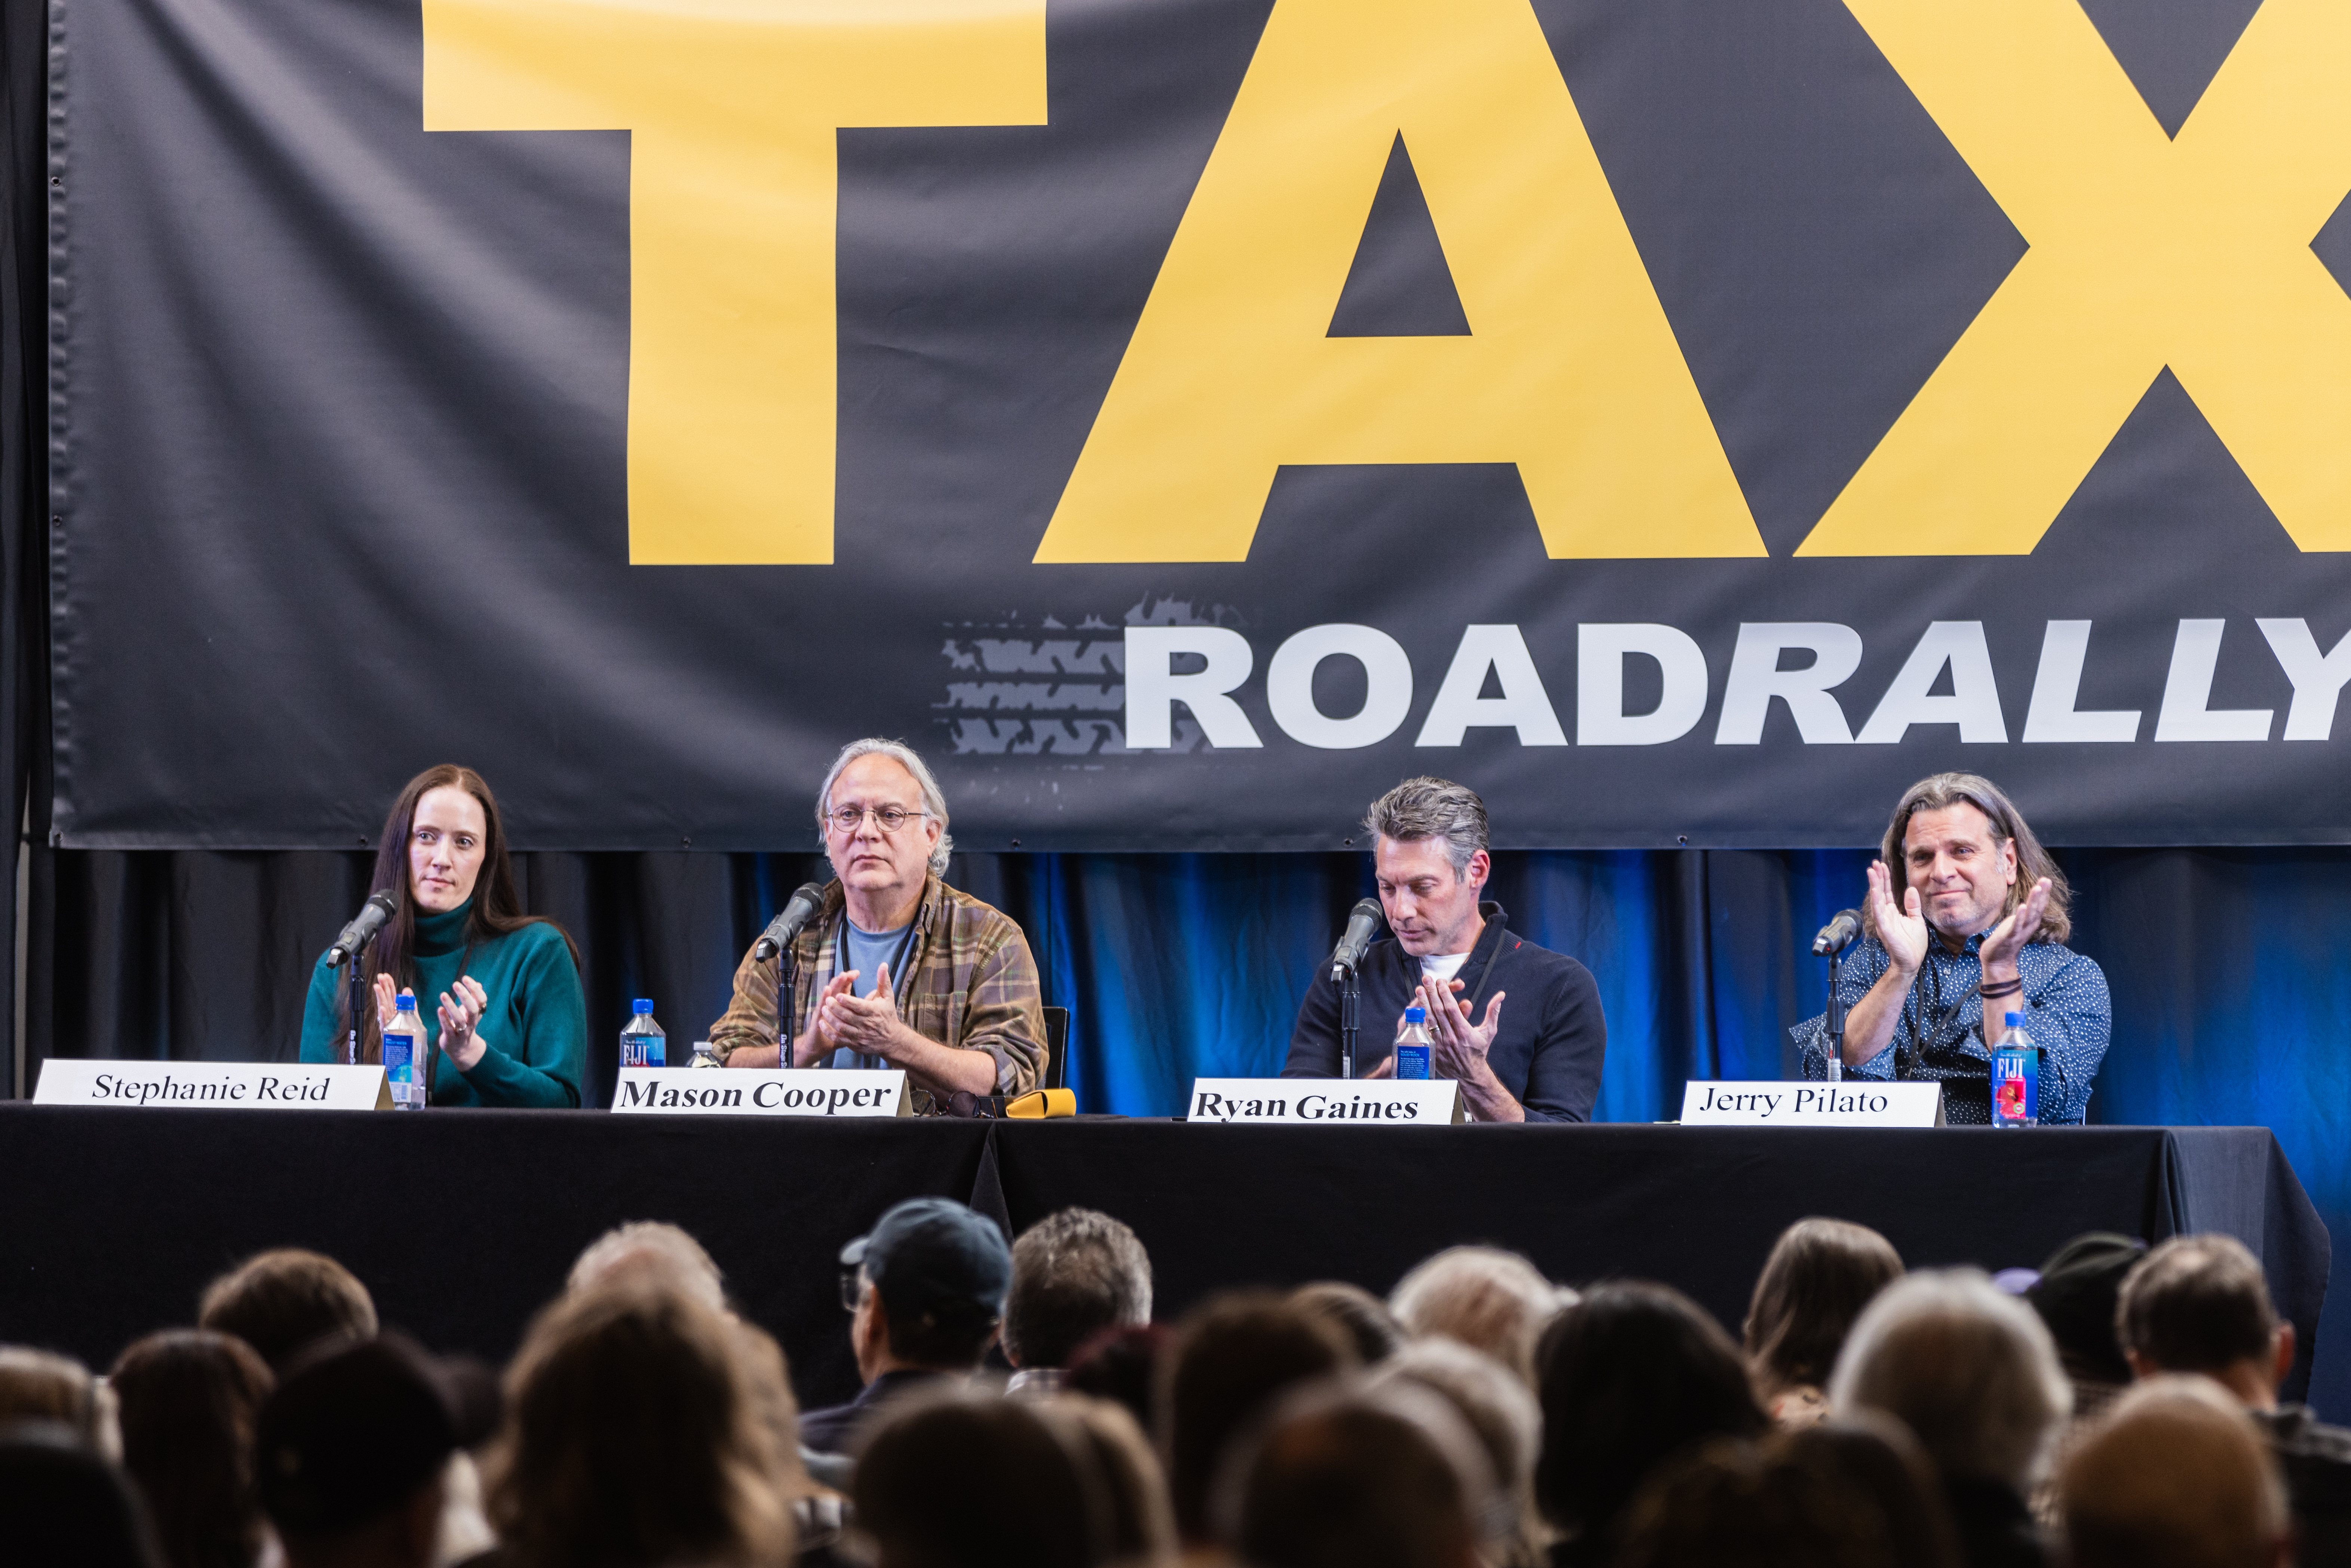 We always love it when the panelists clap for a TAXI member’s song. (Left to right), Licensing Executive, Stephanie Reid; Music Supervisor, Mason Cooper; Licensing Executive, Ryan Gaines; and Licensing Executive, Jerry Pilato all took copies of the song they applauded for!